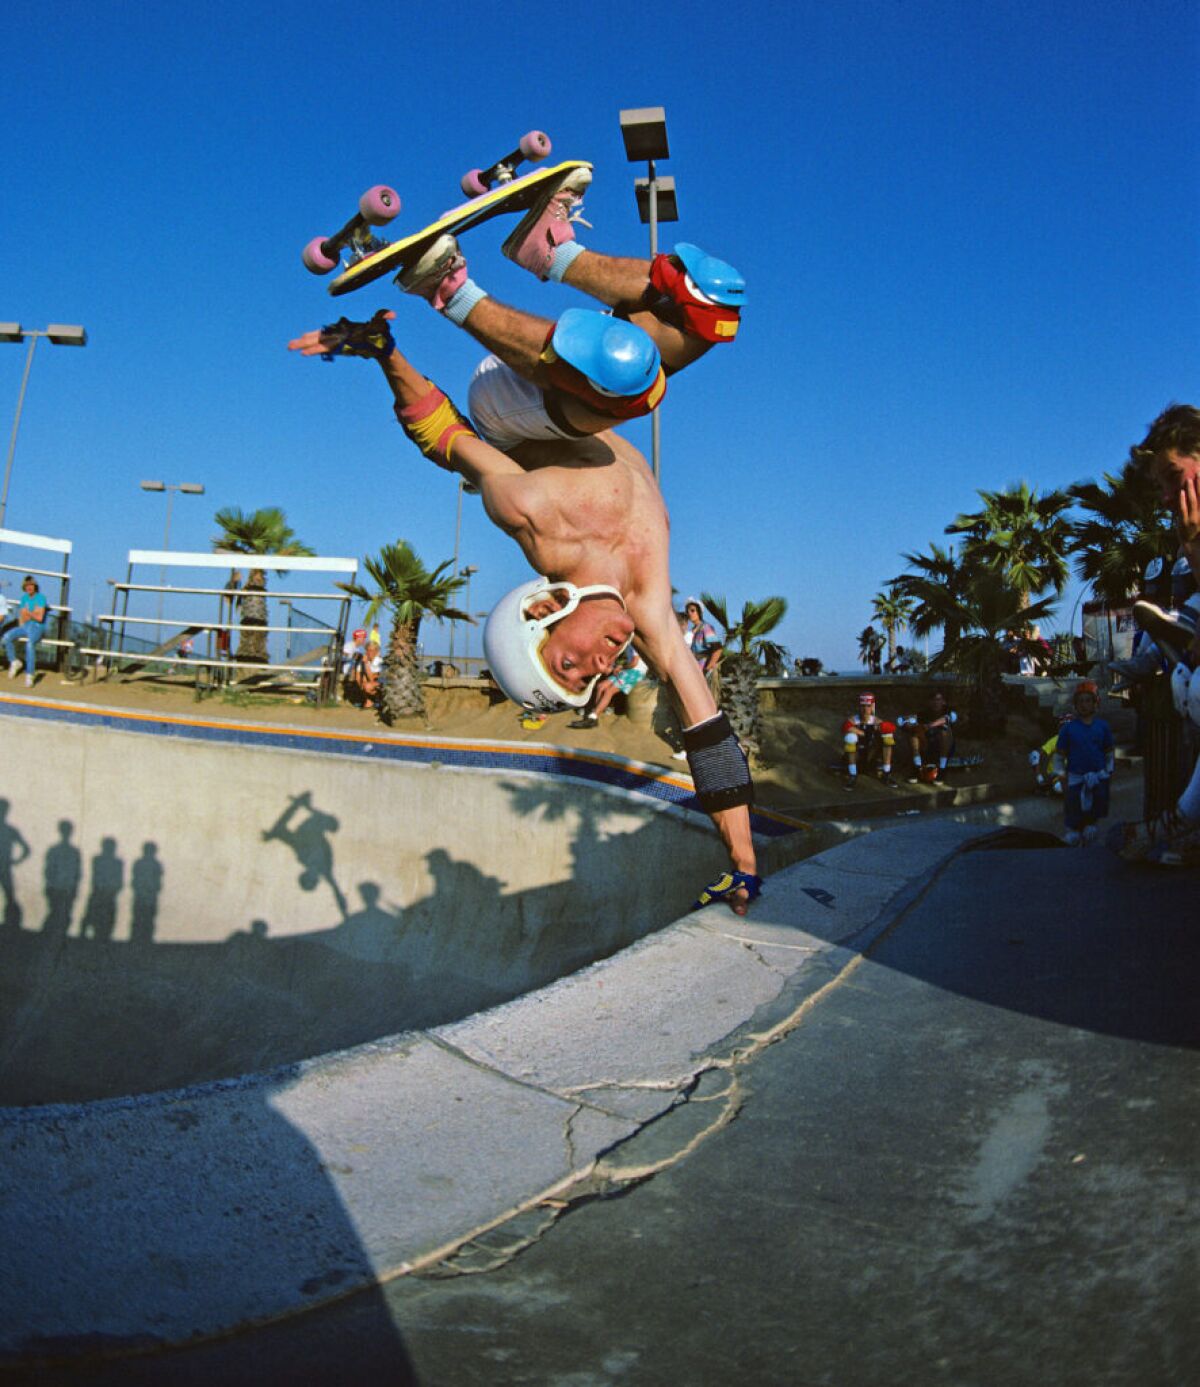 Billy Ruff was inducted into the Skateboarding Hall of Fame.